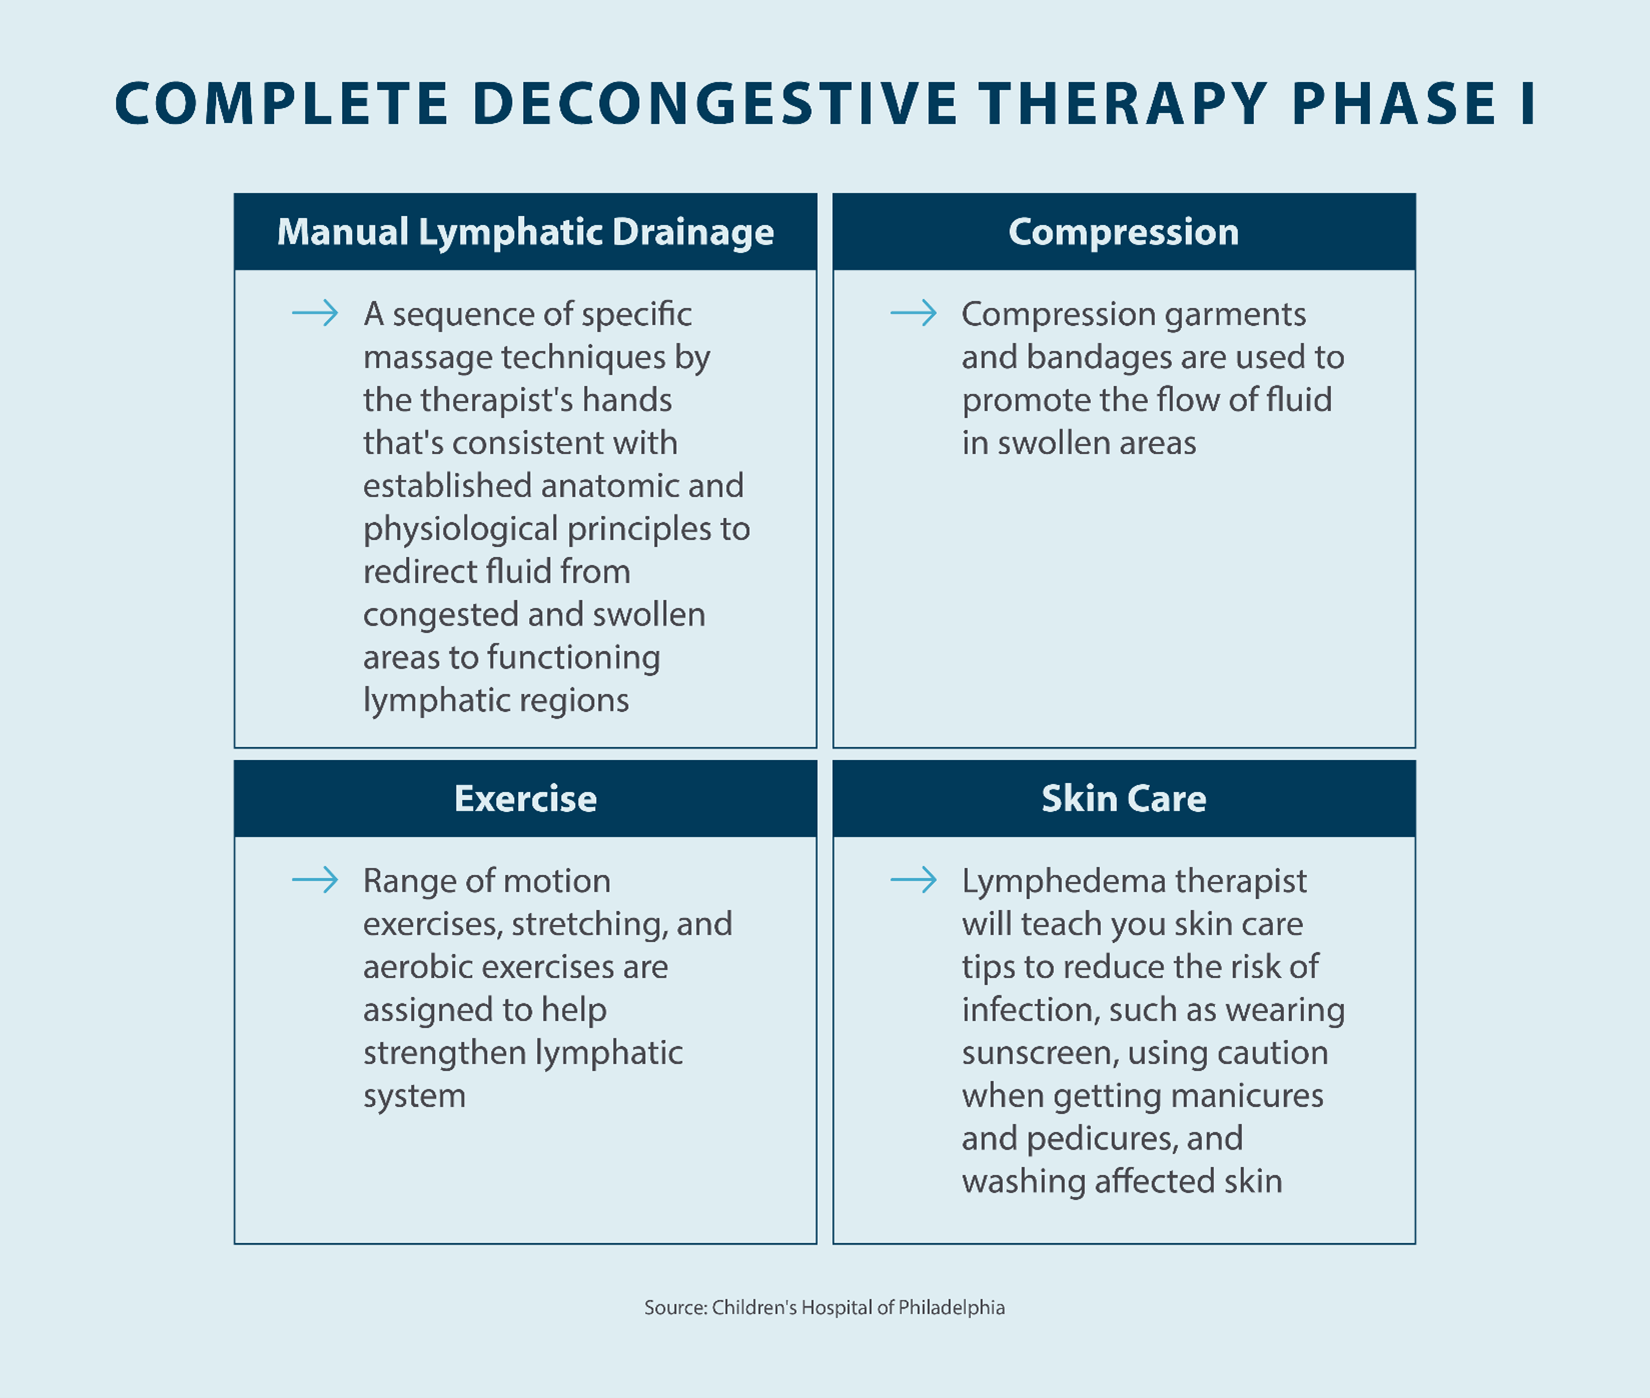 Complete decongestive therapy phase I; manual lymphatic drainage, compression, exercise, skin care Source Children's Hospital of Philadelphia